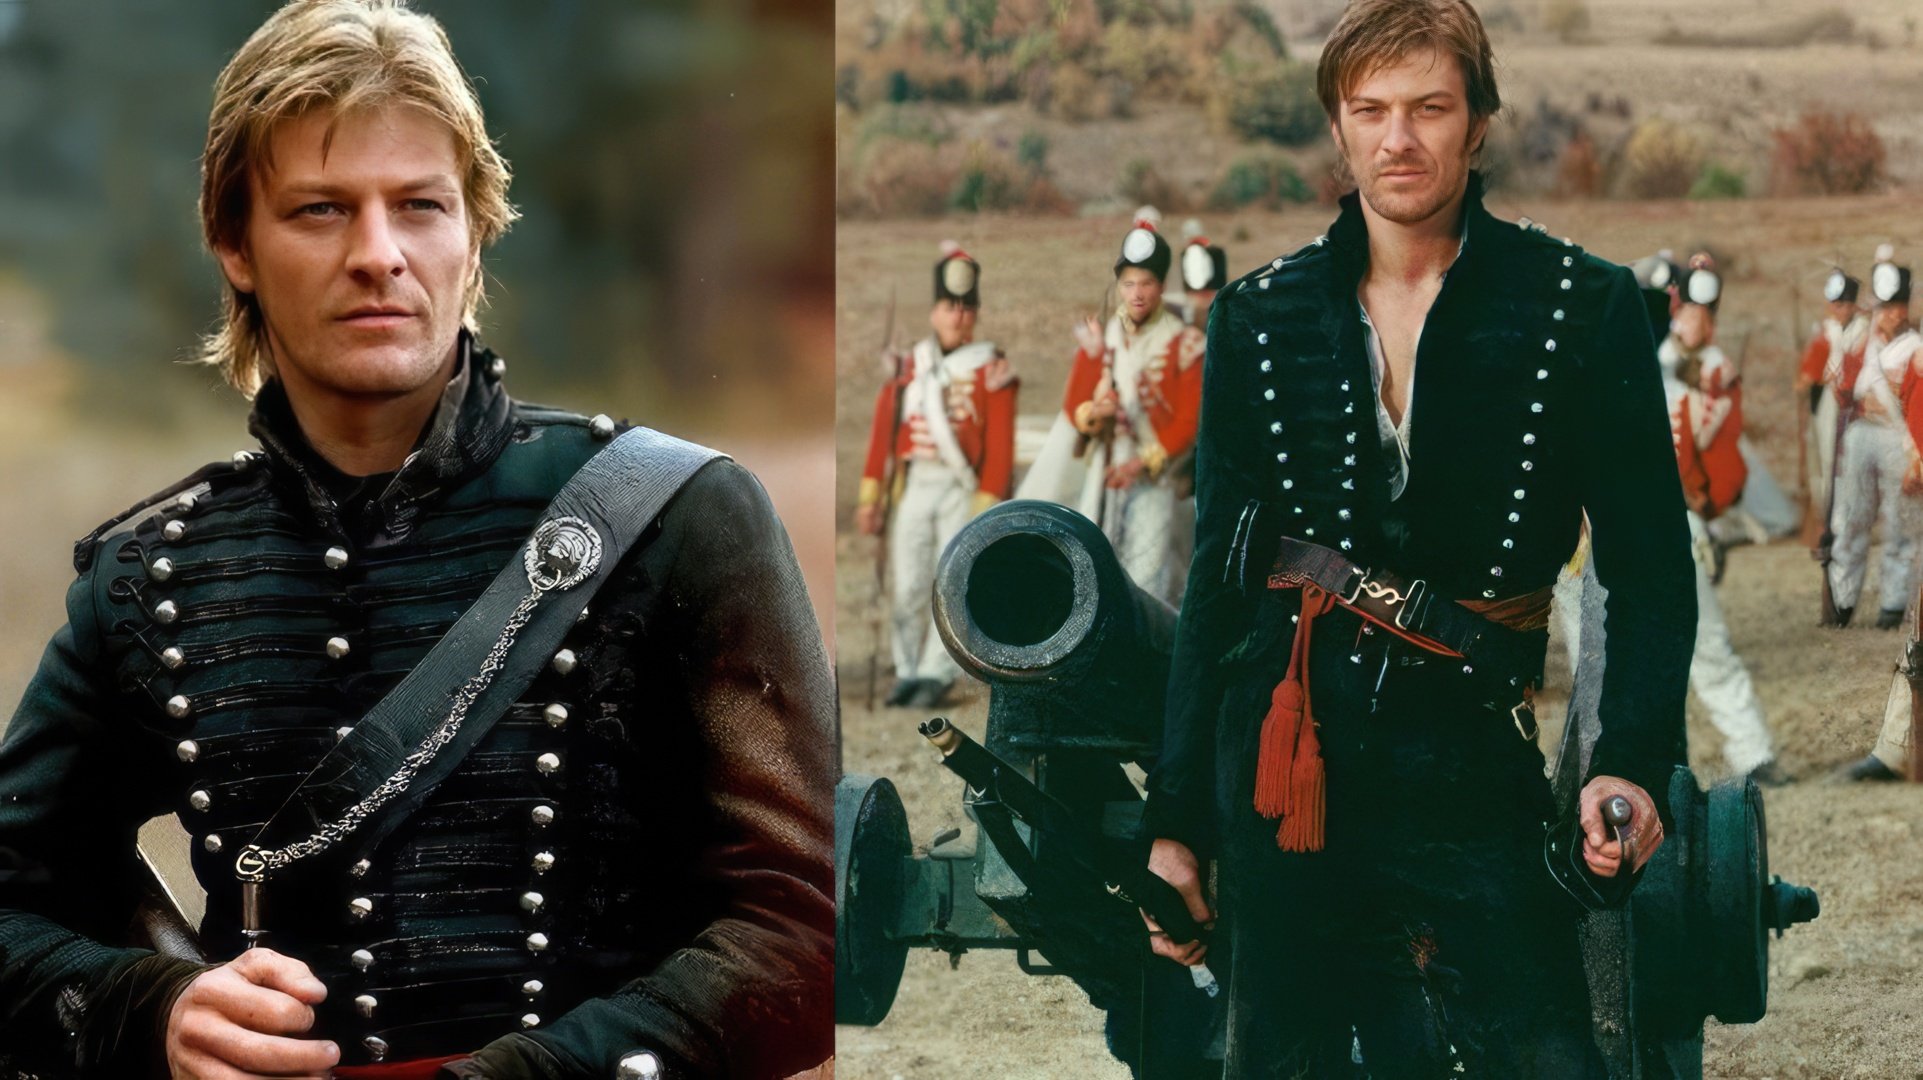 Sean Bean in the role of Officer Sharpe